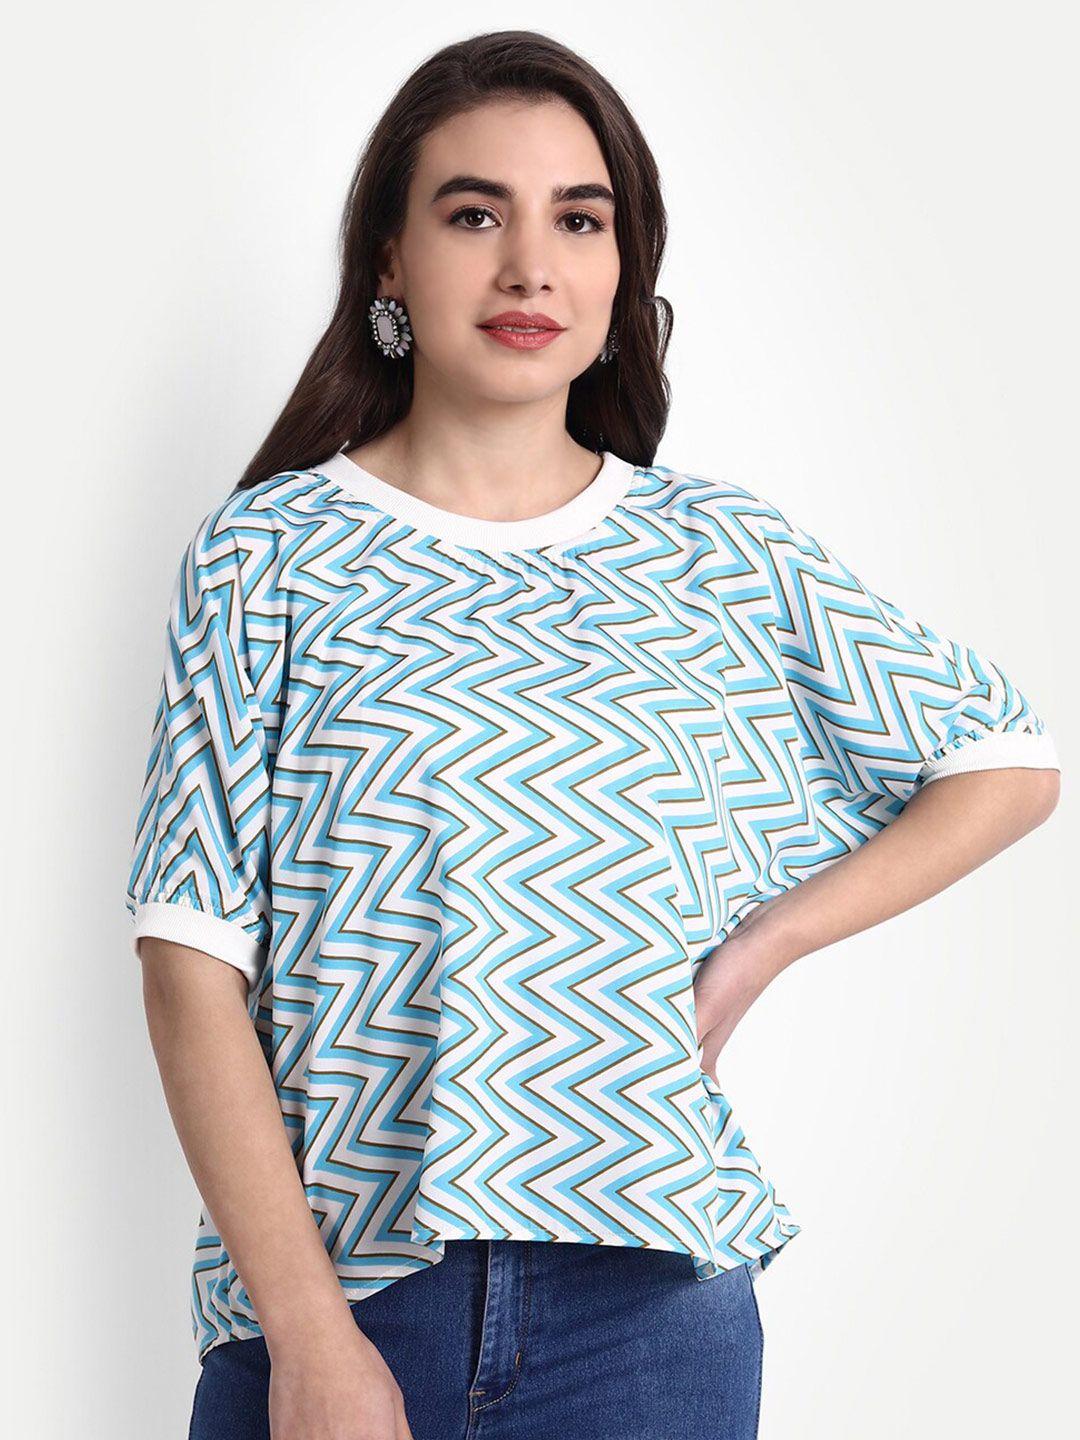 rediscover fashion blue & white geometric print extended sleeves top